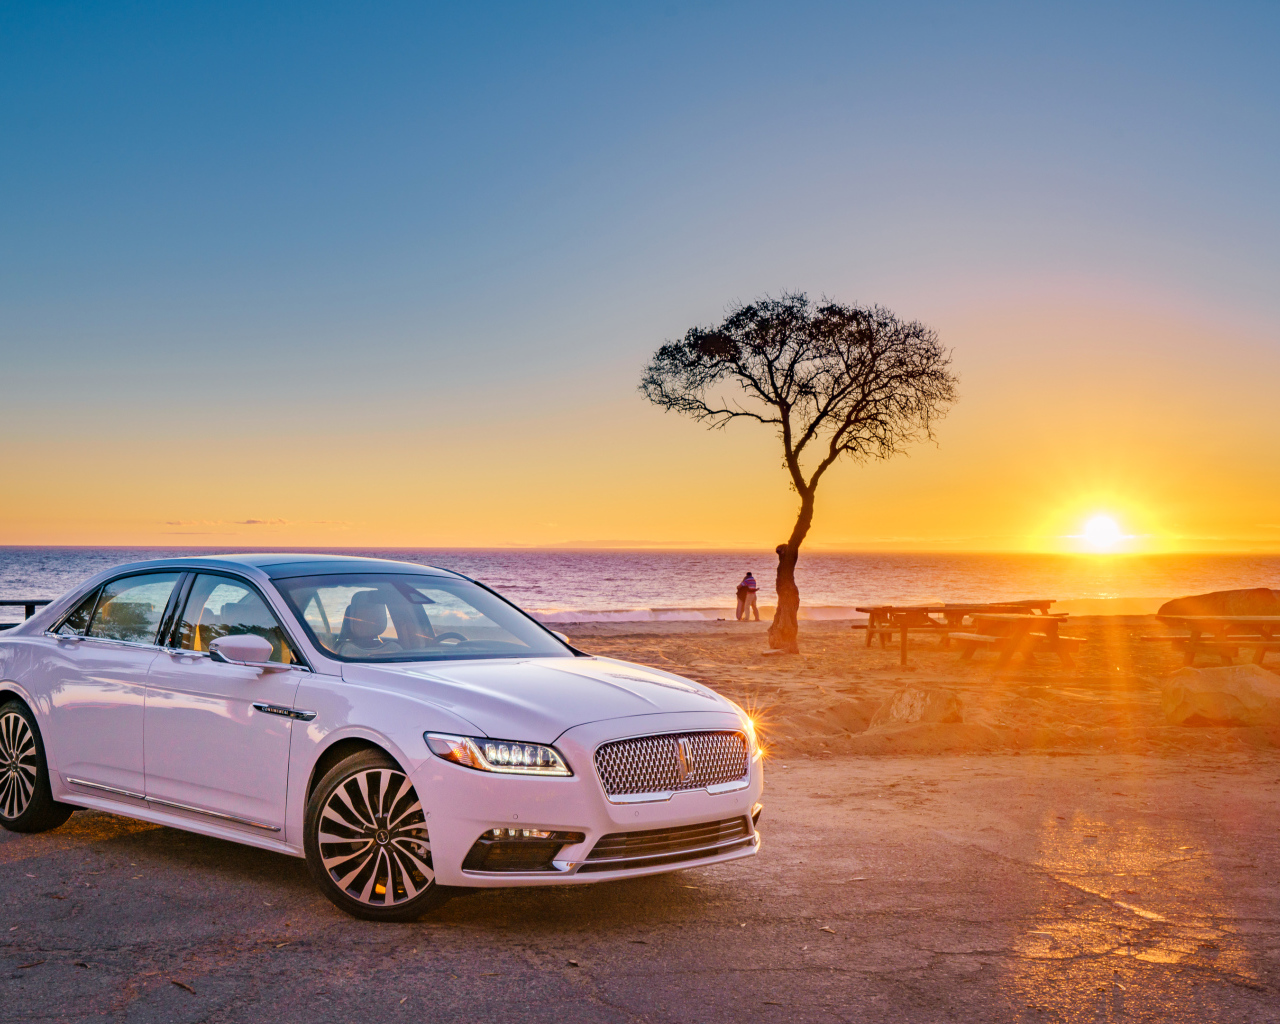 White Lincoln Continental 2017 on the background of sunset